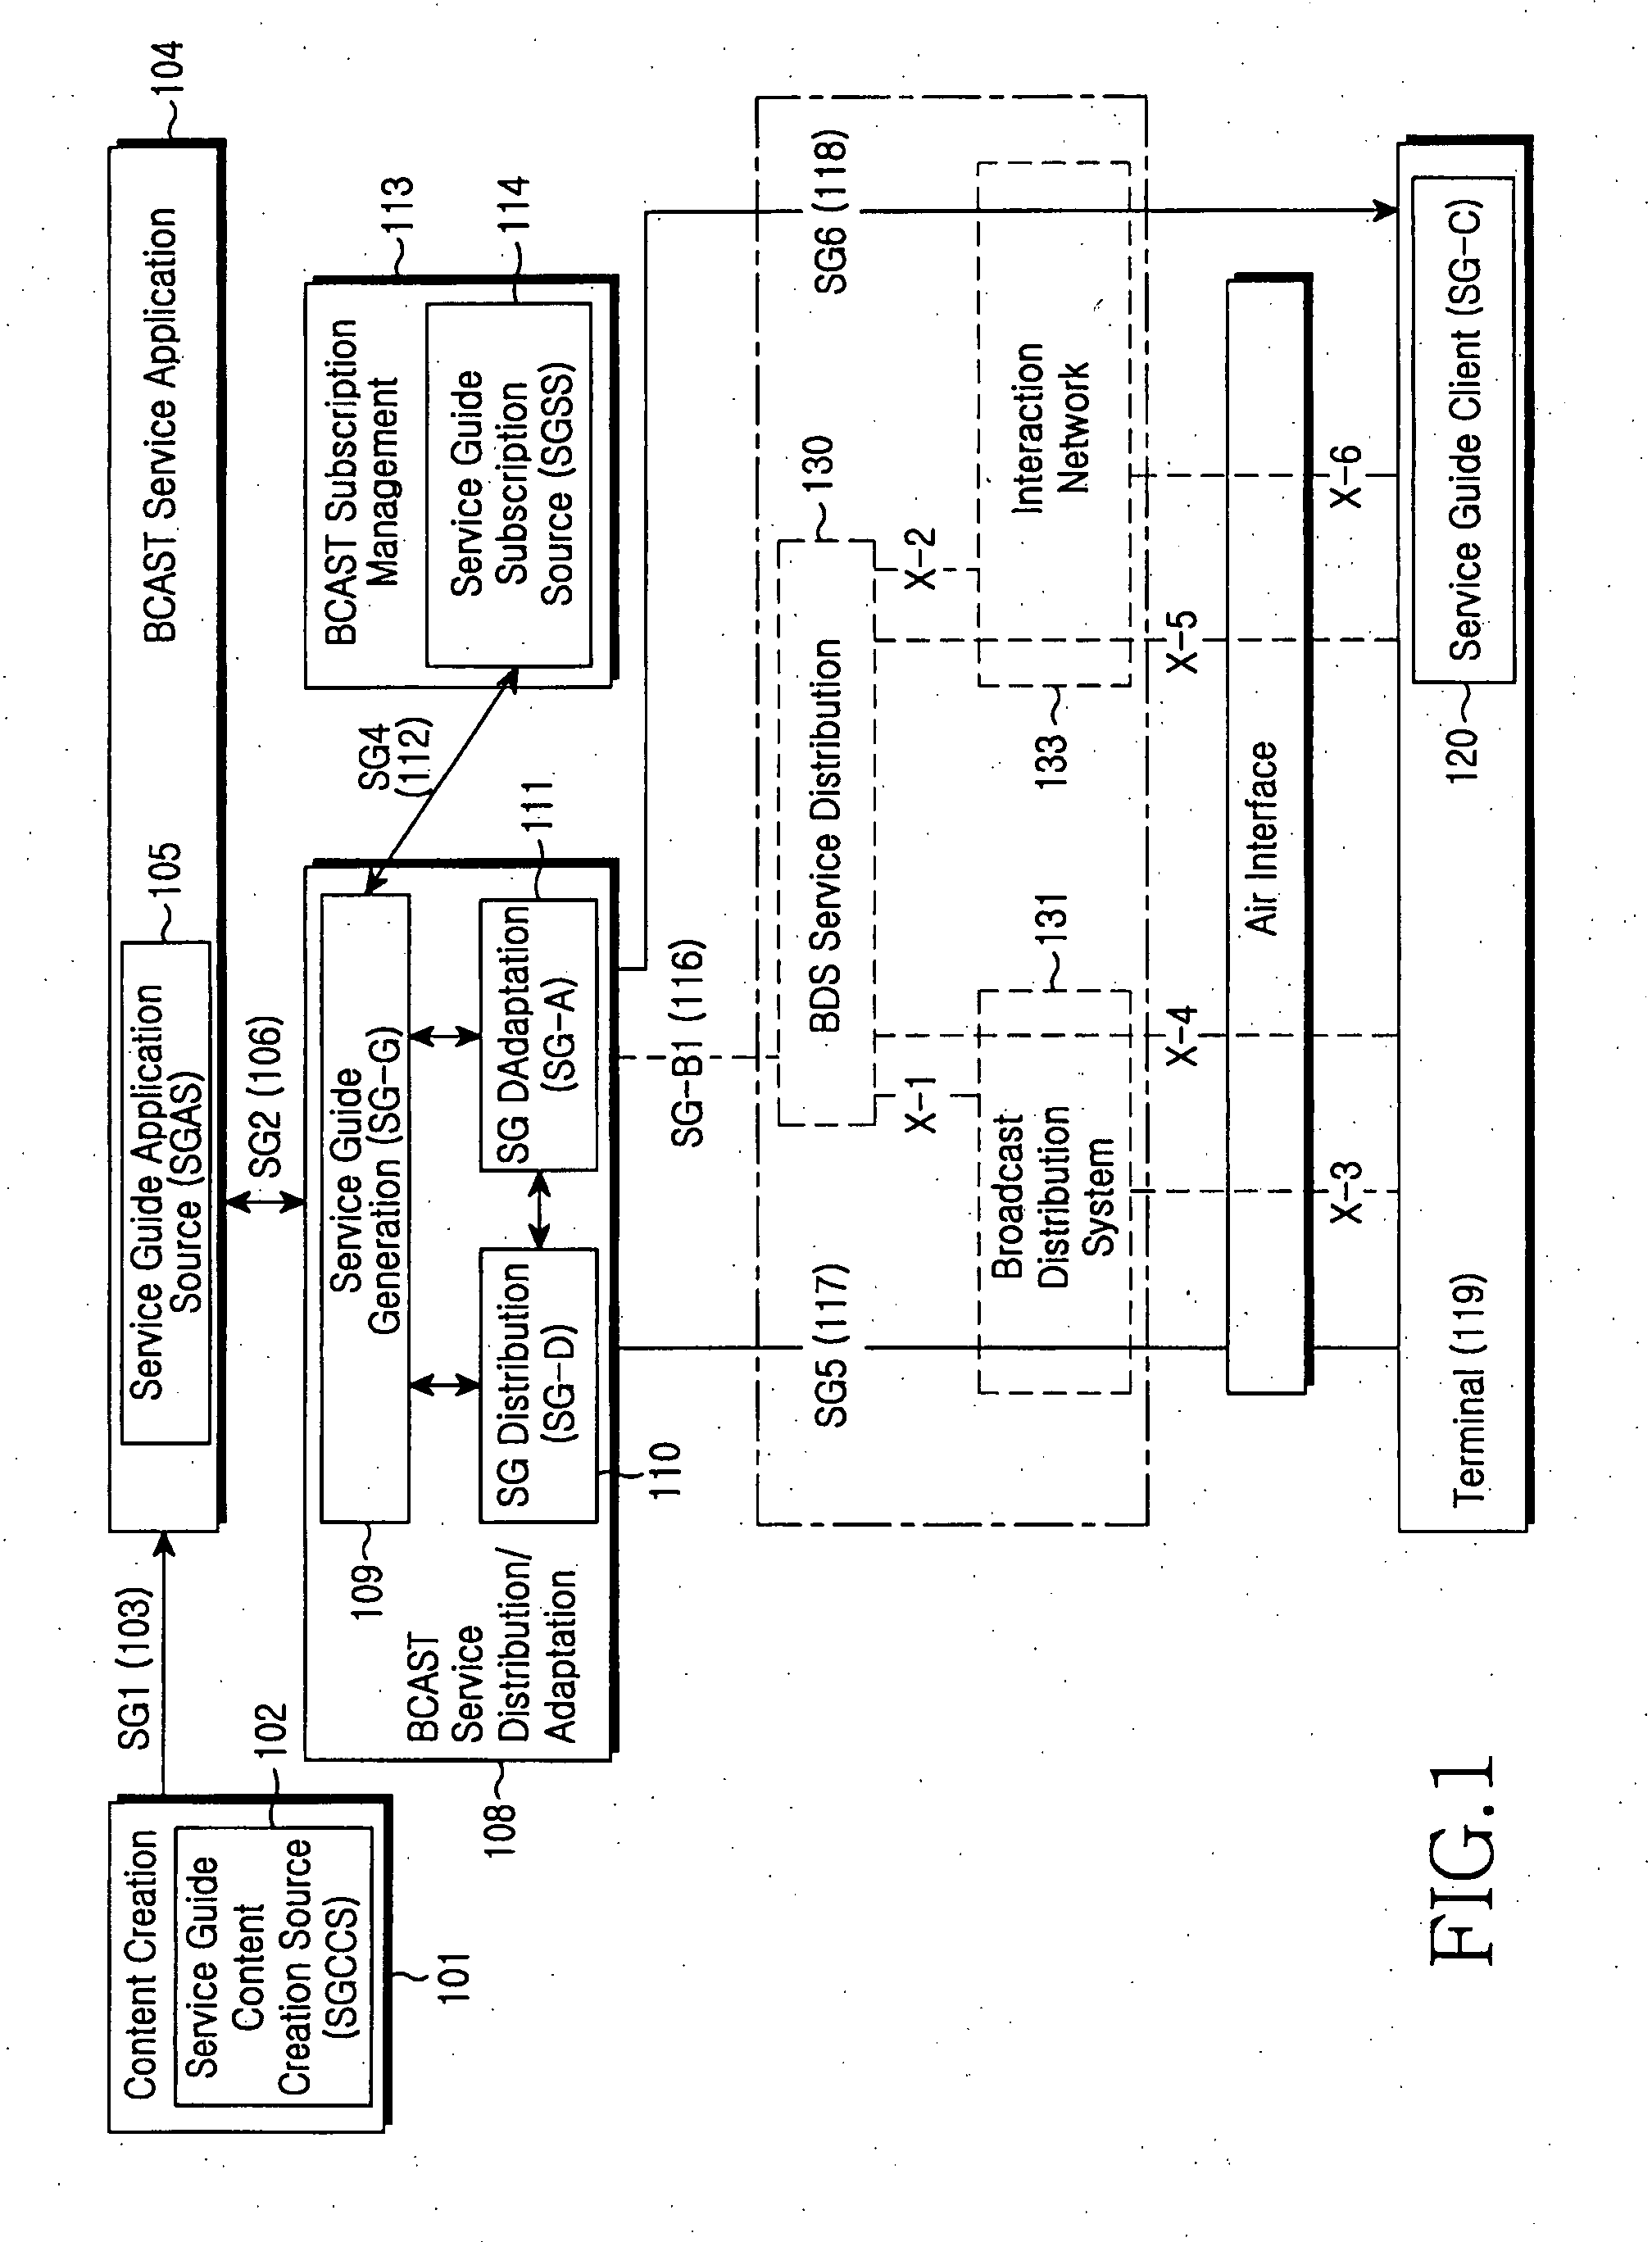 Method and system for providing notification message in a mobile broadcast system